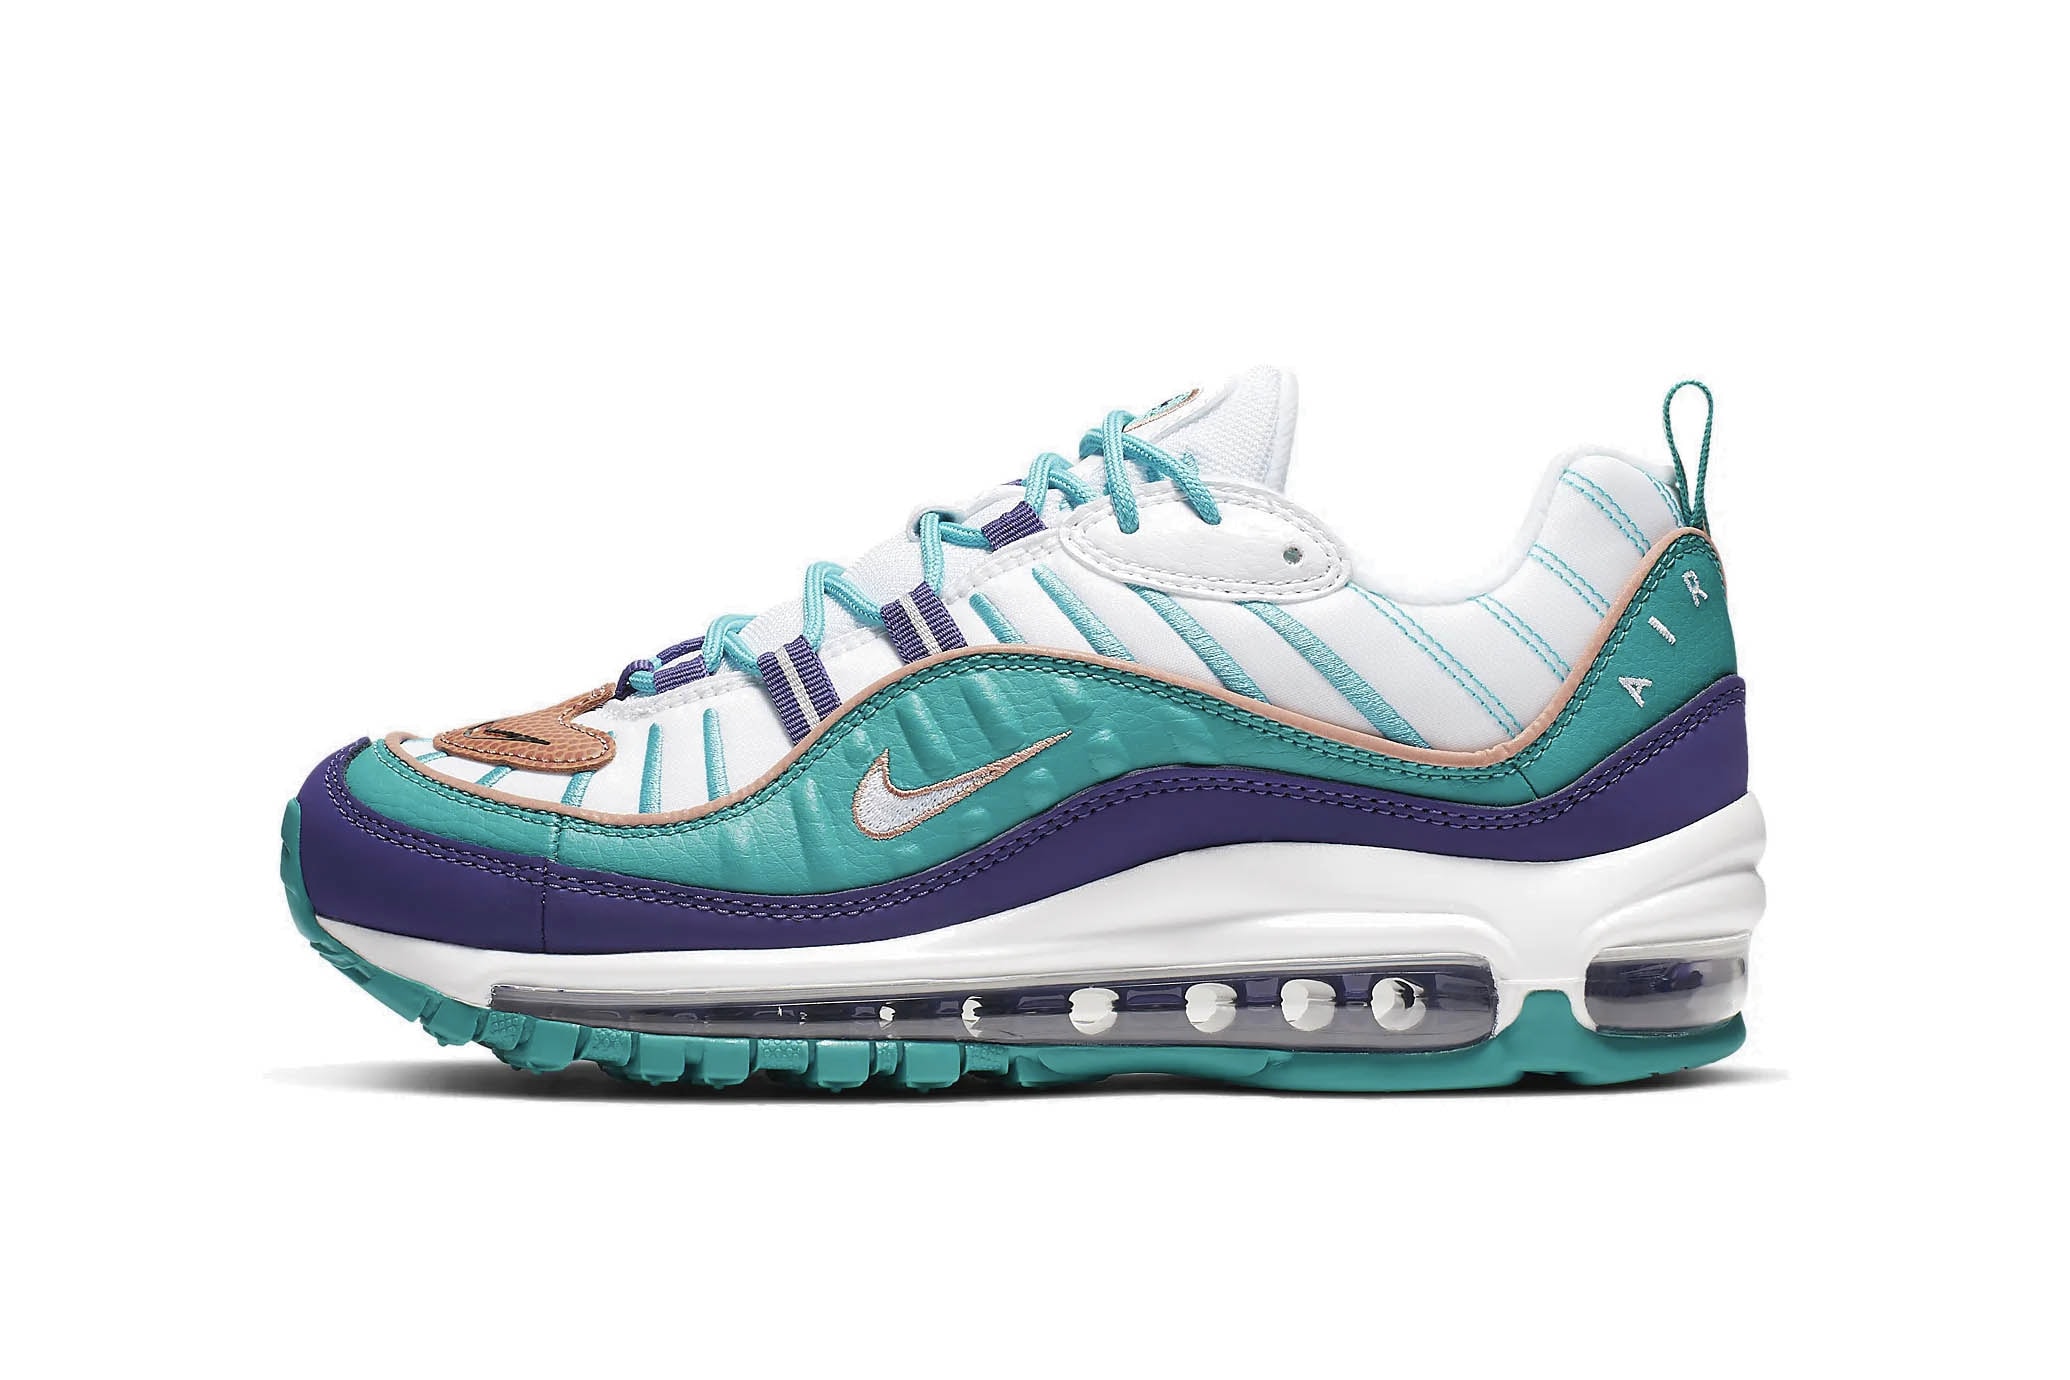 Nike Aix Max 98 "Court Purple/Spirit Teal" Shoe White Turquoise Blue Summer Sneaker Trainer Release